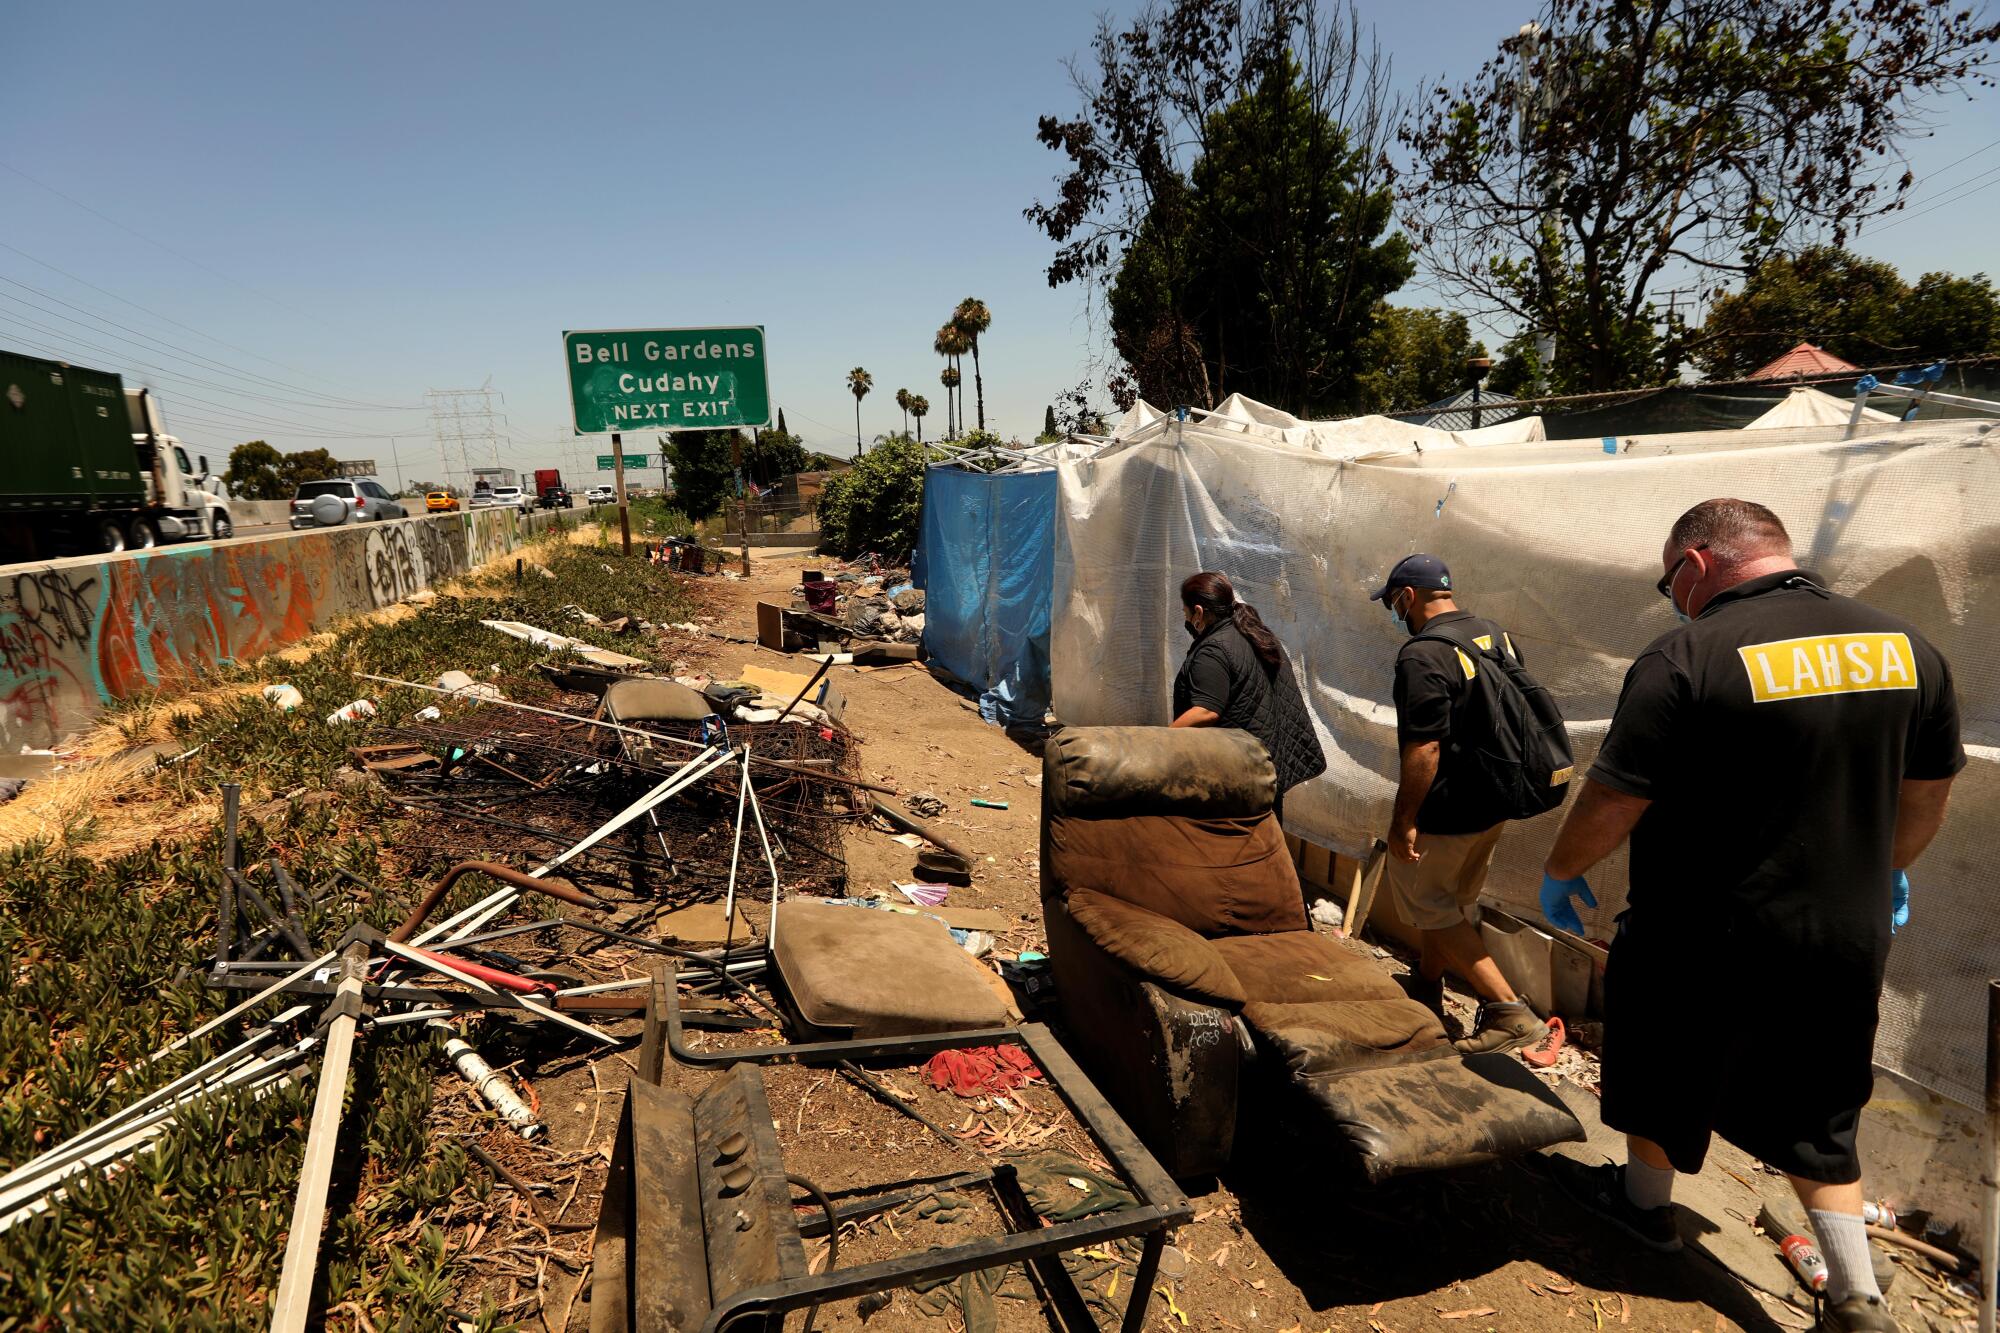 Outreach workers check on homeless encampments in Bell Gardens